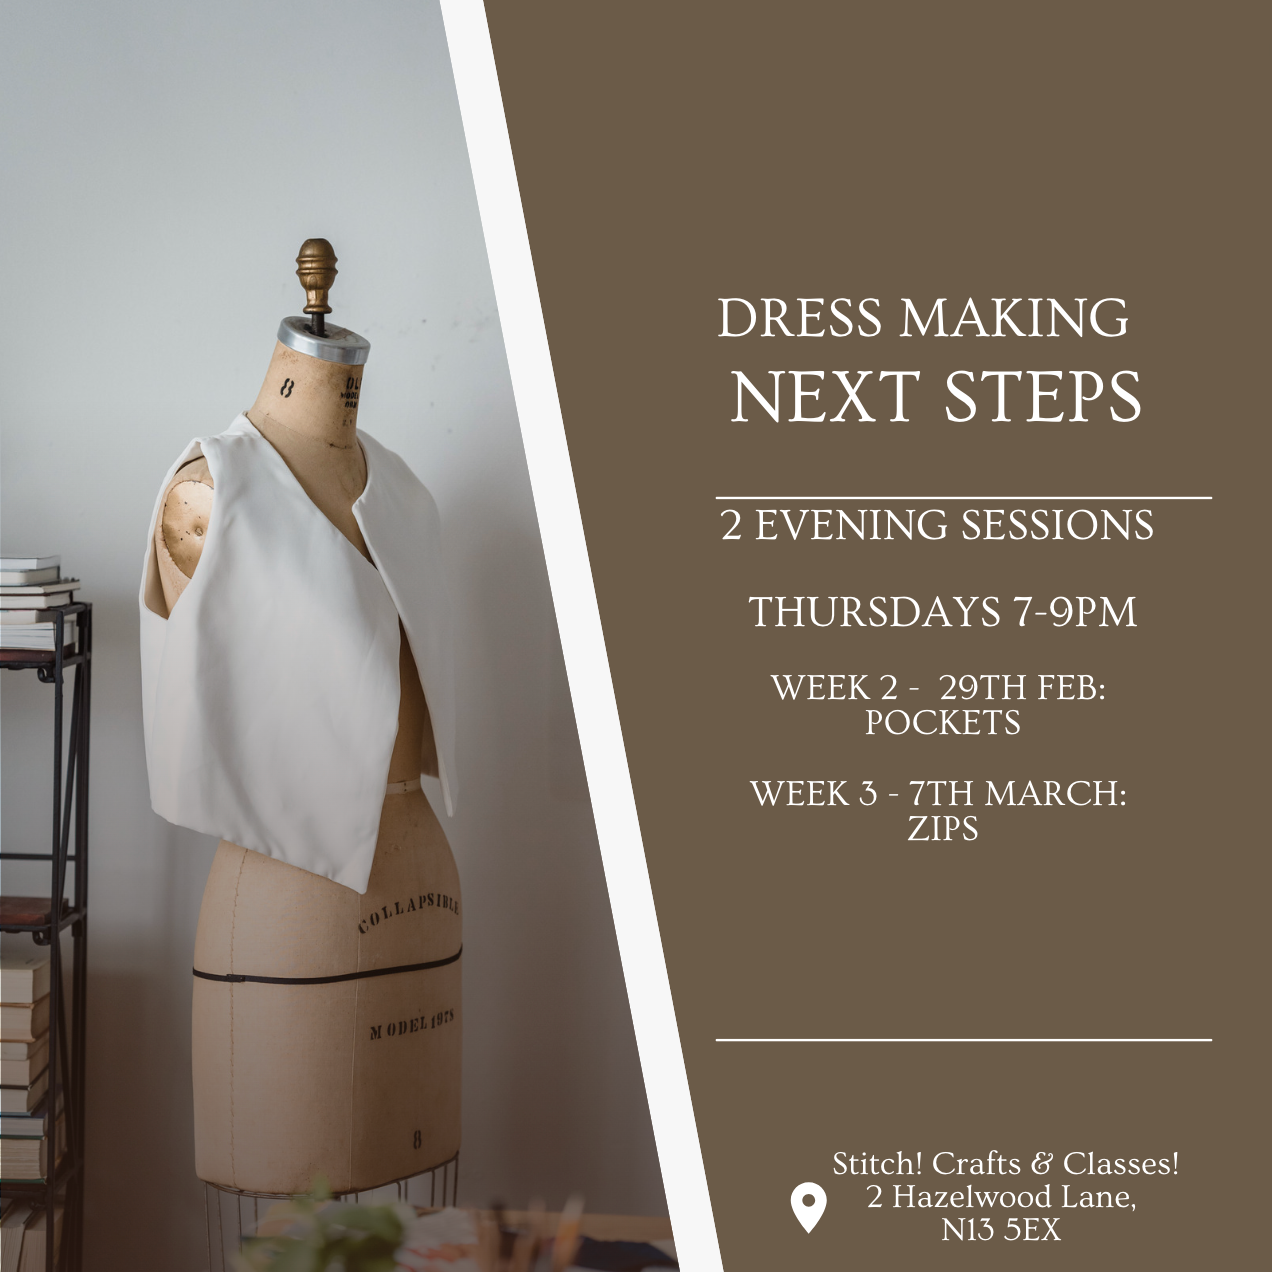 poster or flyer advertising event Dressmaking next steps course